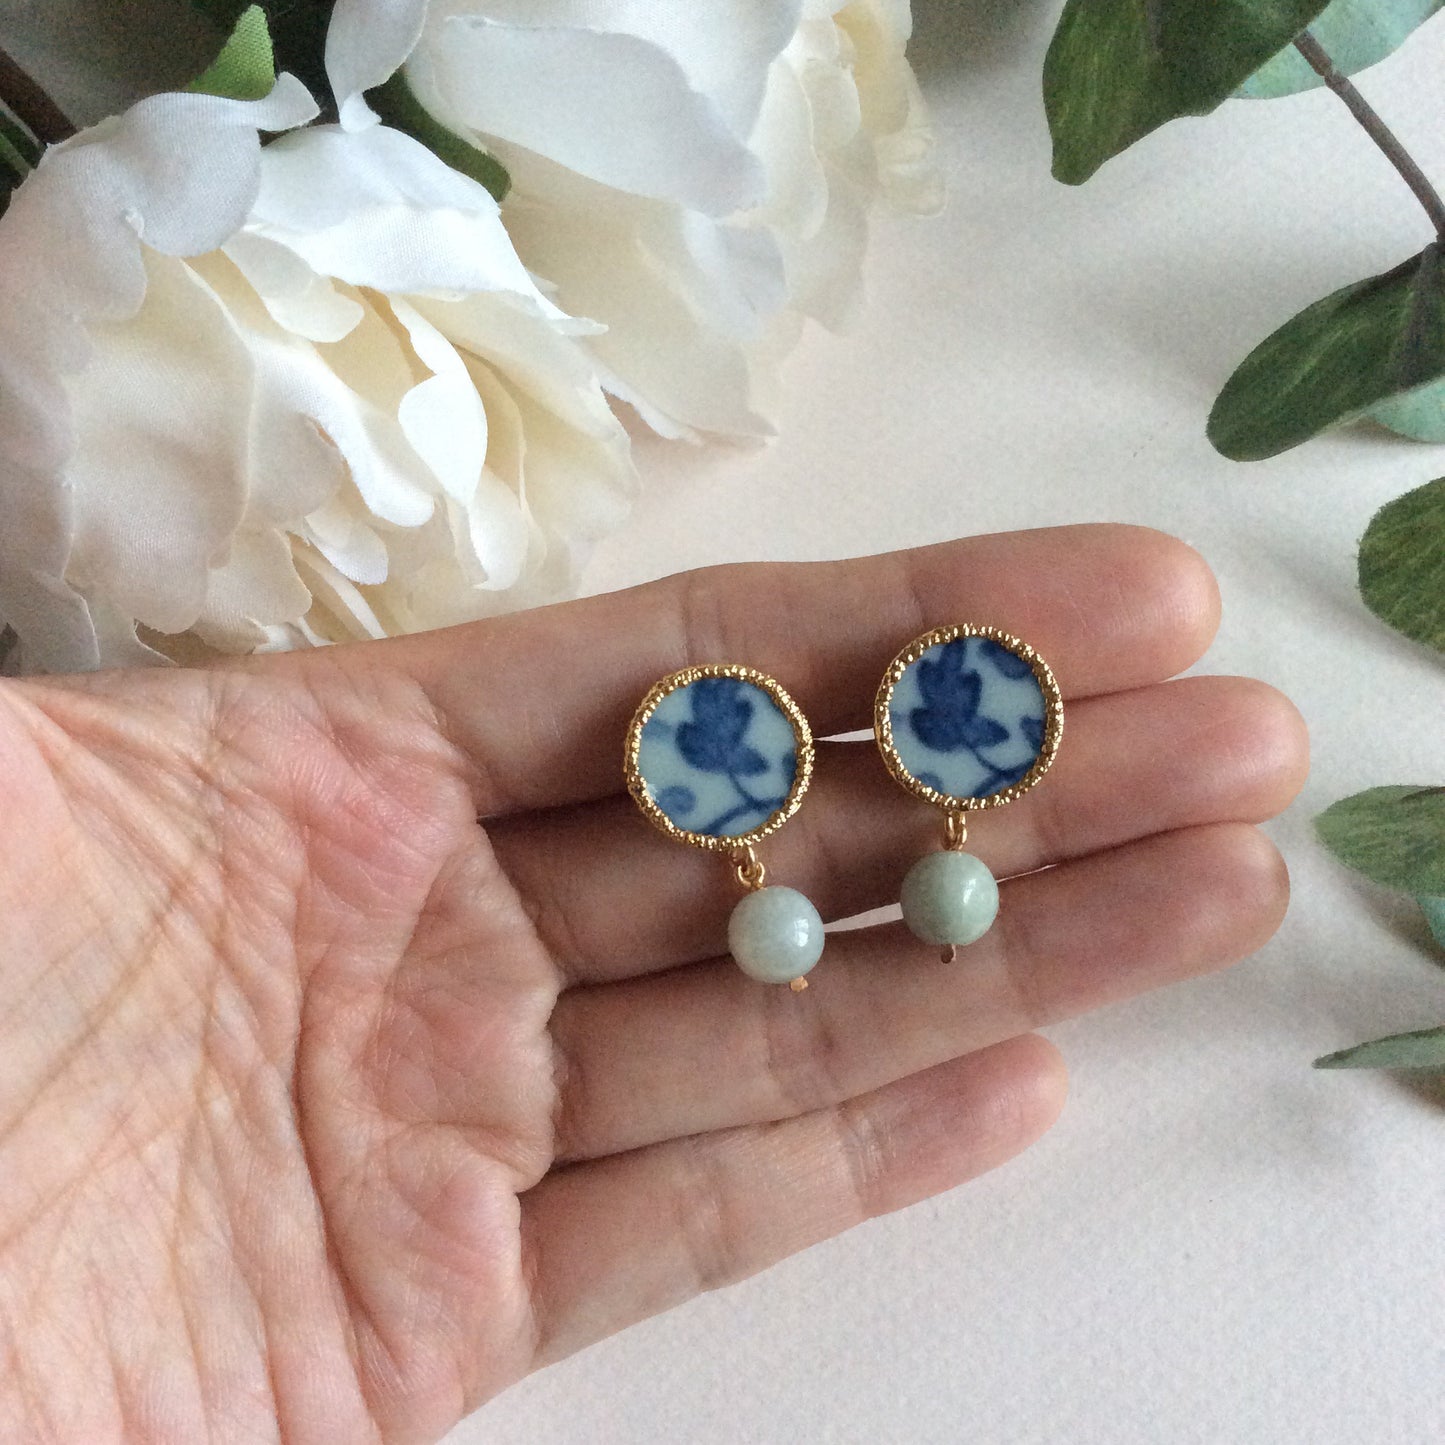 Chinoiserie porcelain stud earrings with jade drops